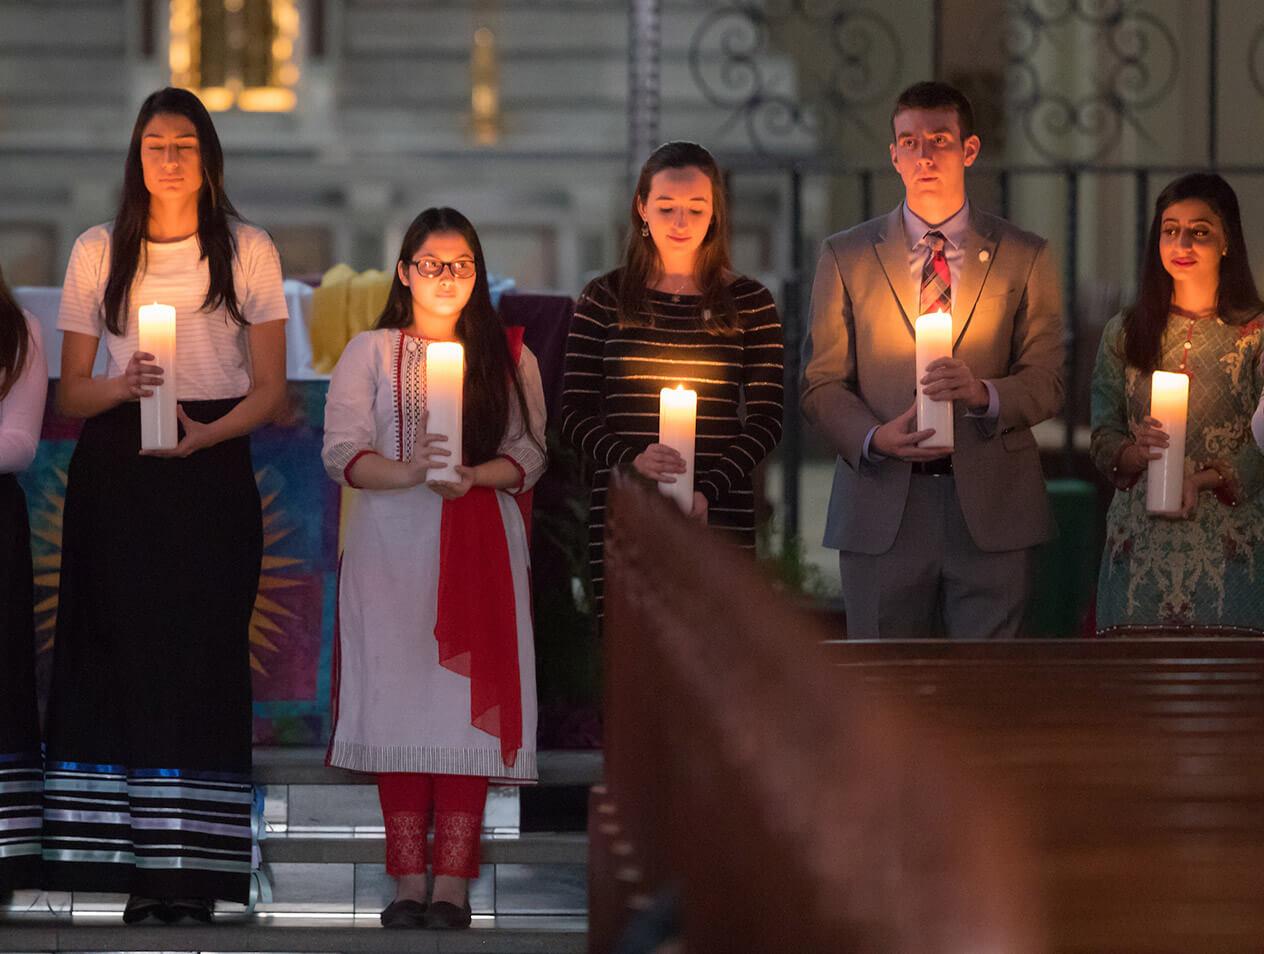 Students holding lit candles during an Interfaith Prayer Service